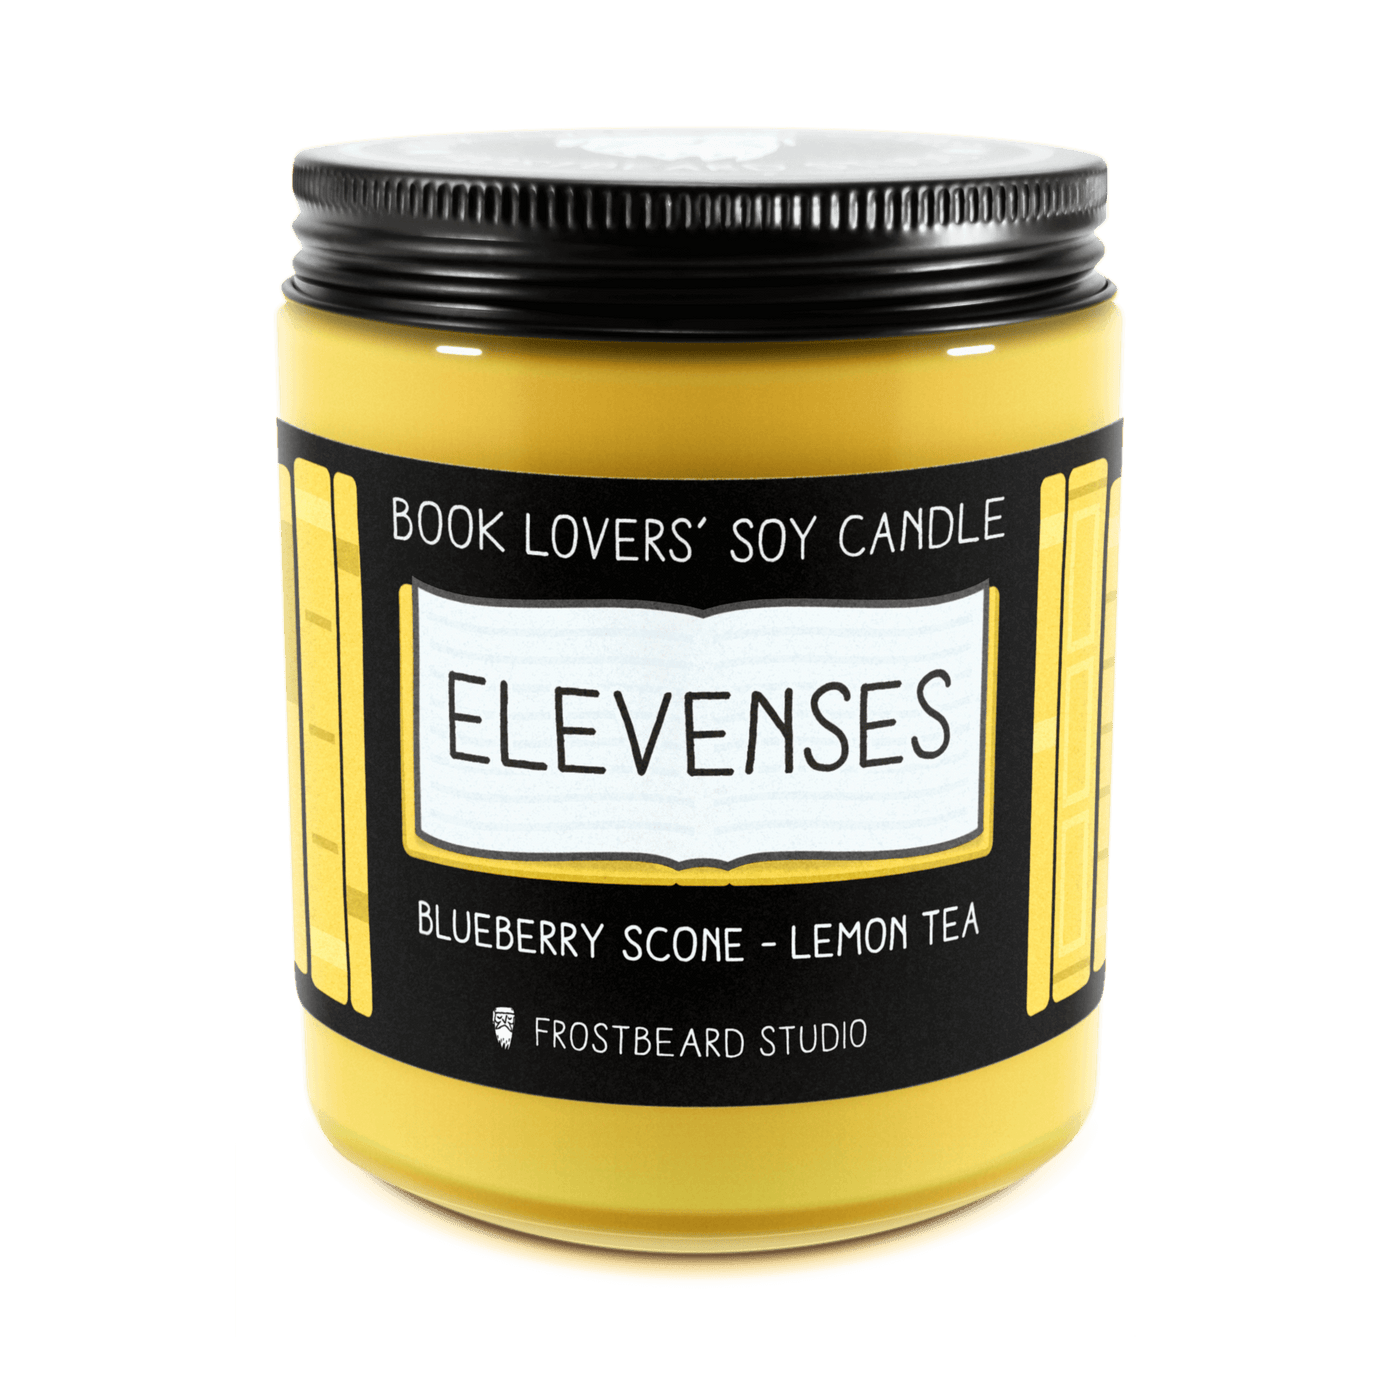 Elevenses  -  8 oz Jar  -  Book Lovers' Soy Candle  -  Frostbeard Studio